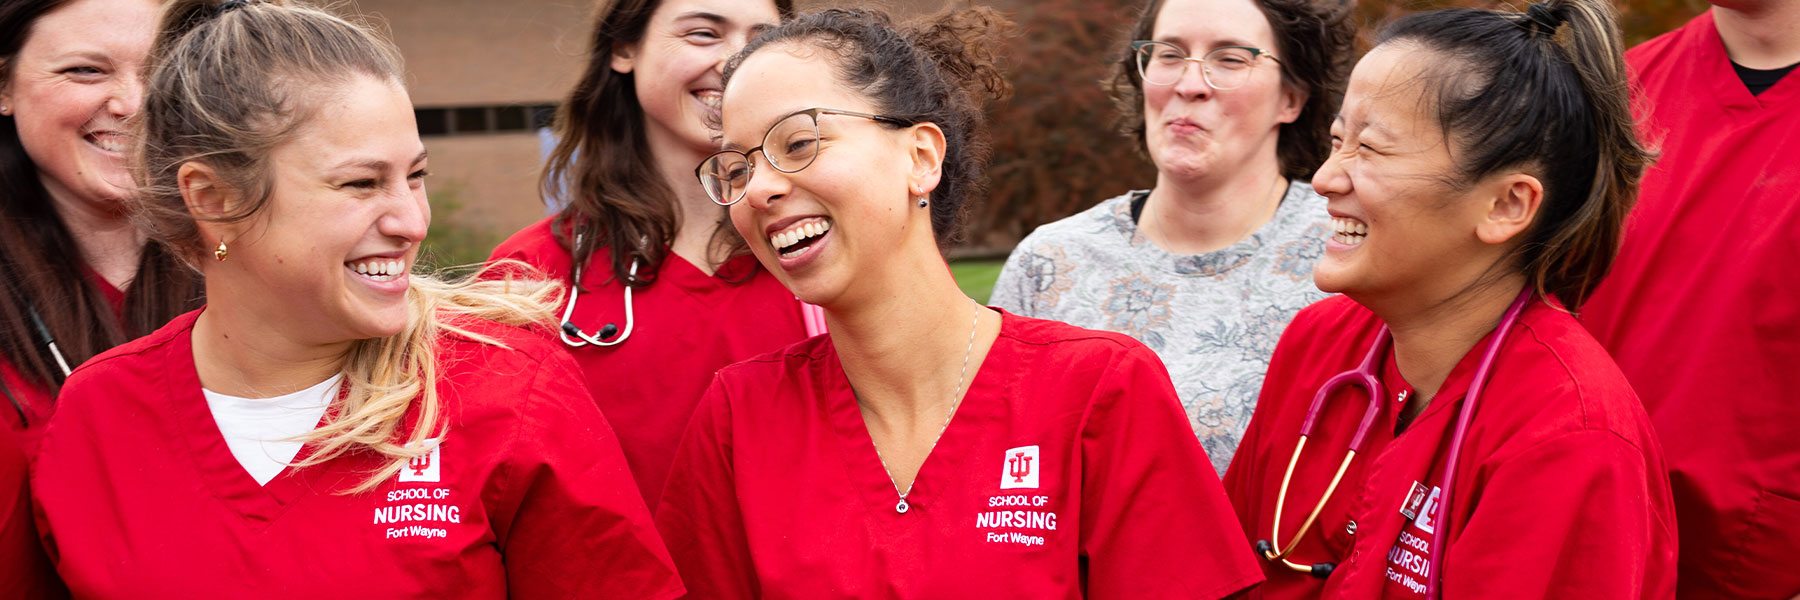 Nursing students smiling and laughing